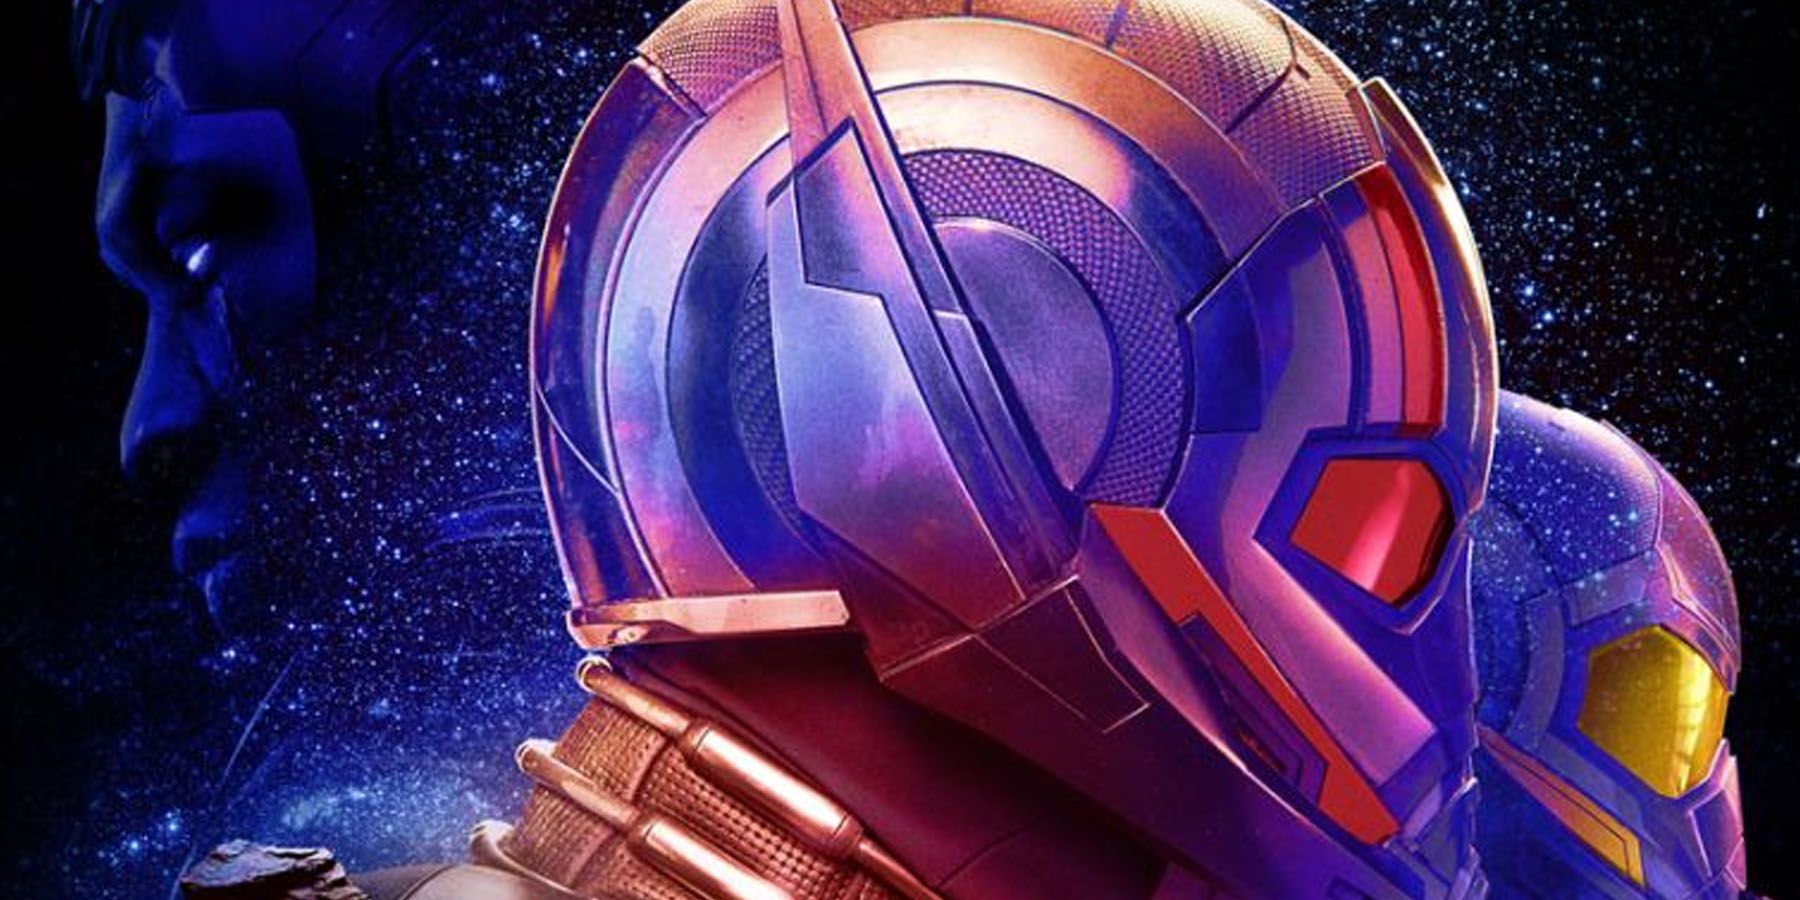 Quantumania Hints The Film Reveals About The Greater MCU